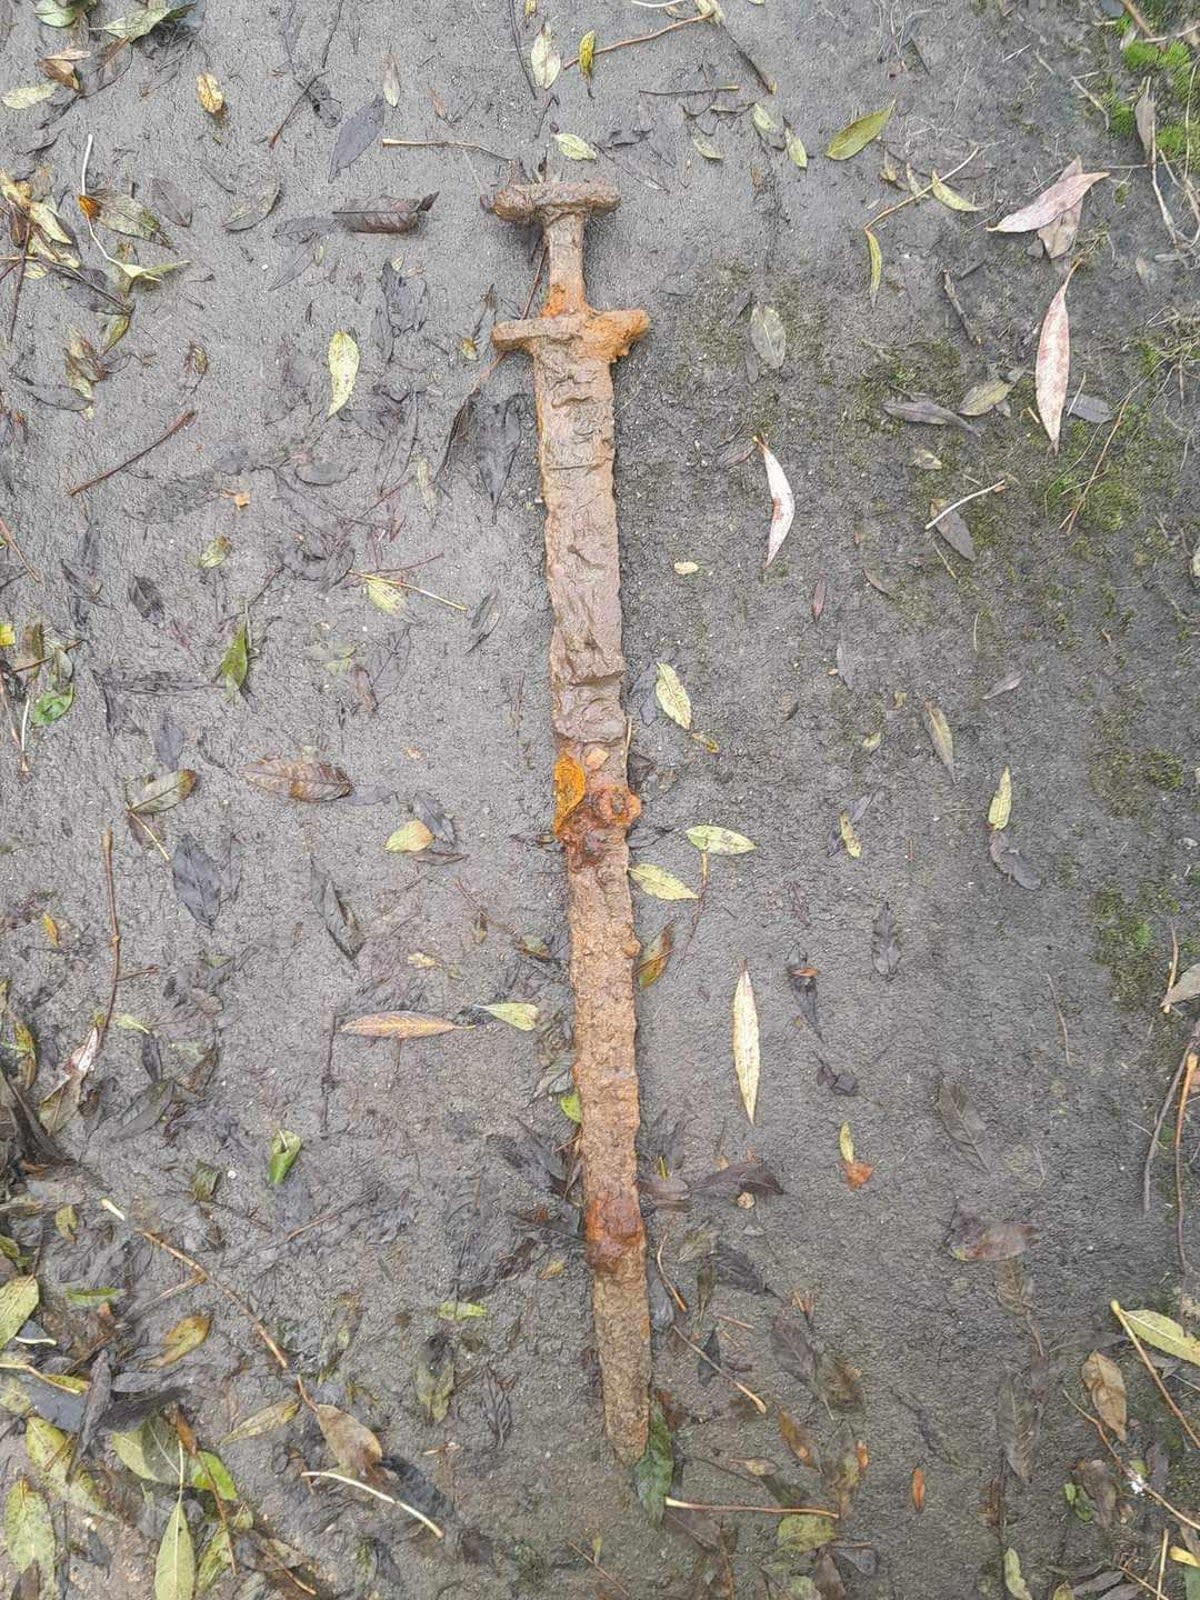 The 1,100-year-old sword was found in the River Cherwell  (Trevor Penny)